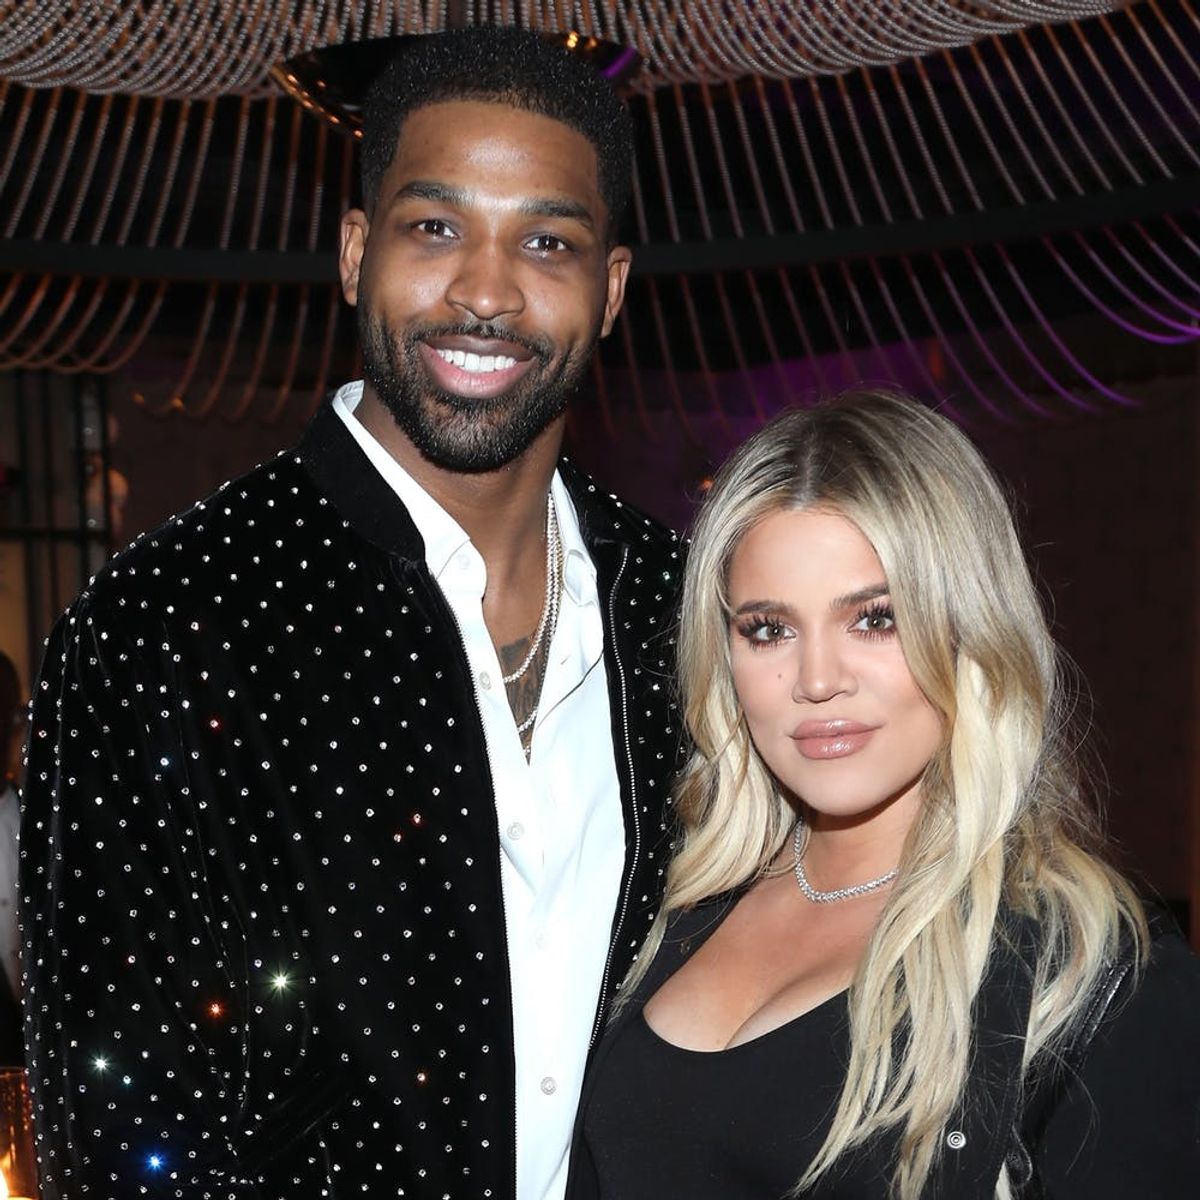 How Khloé Kardashian Is Spending the Final Days of Her Pregnancy